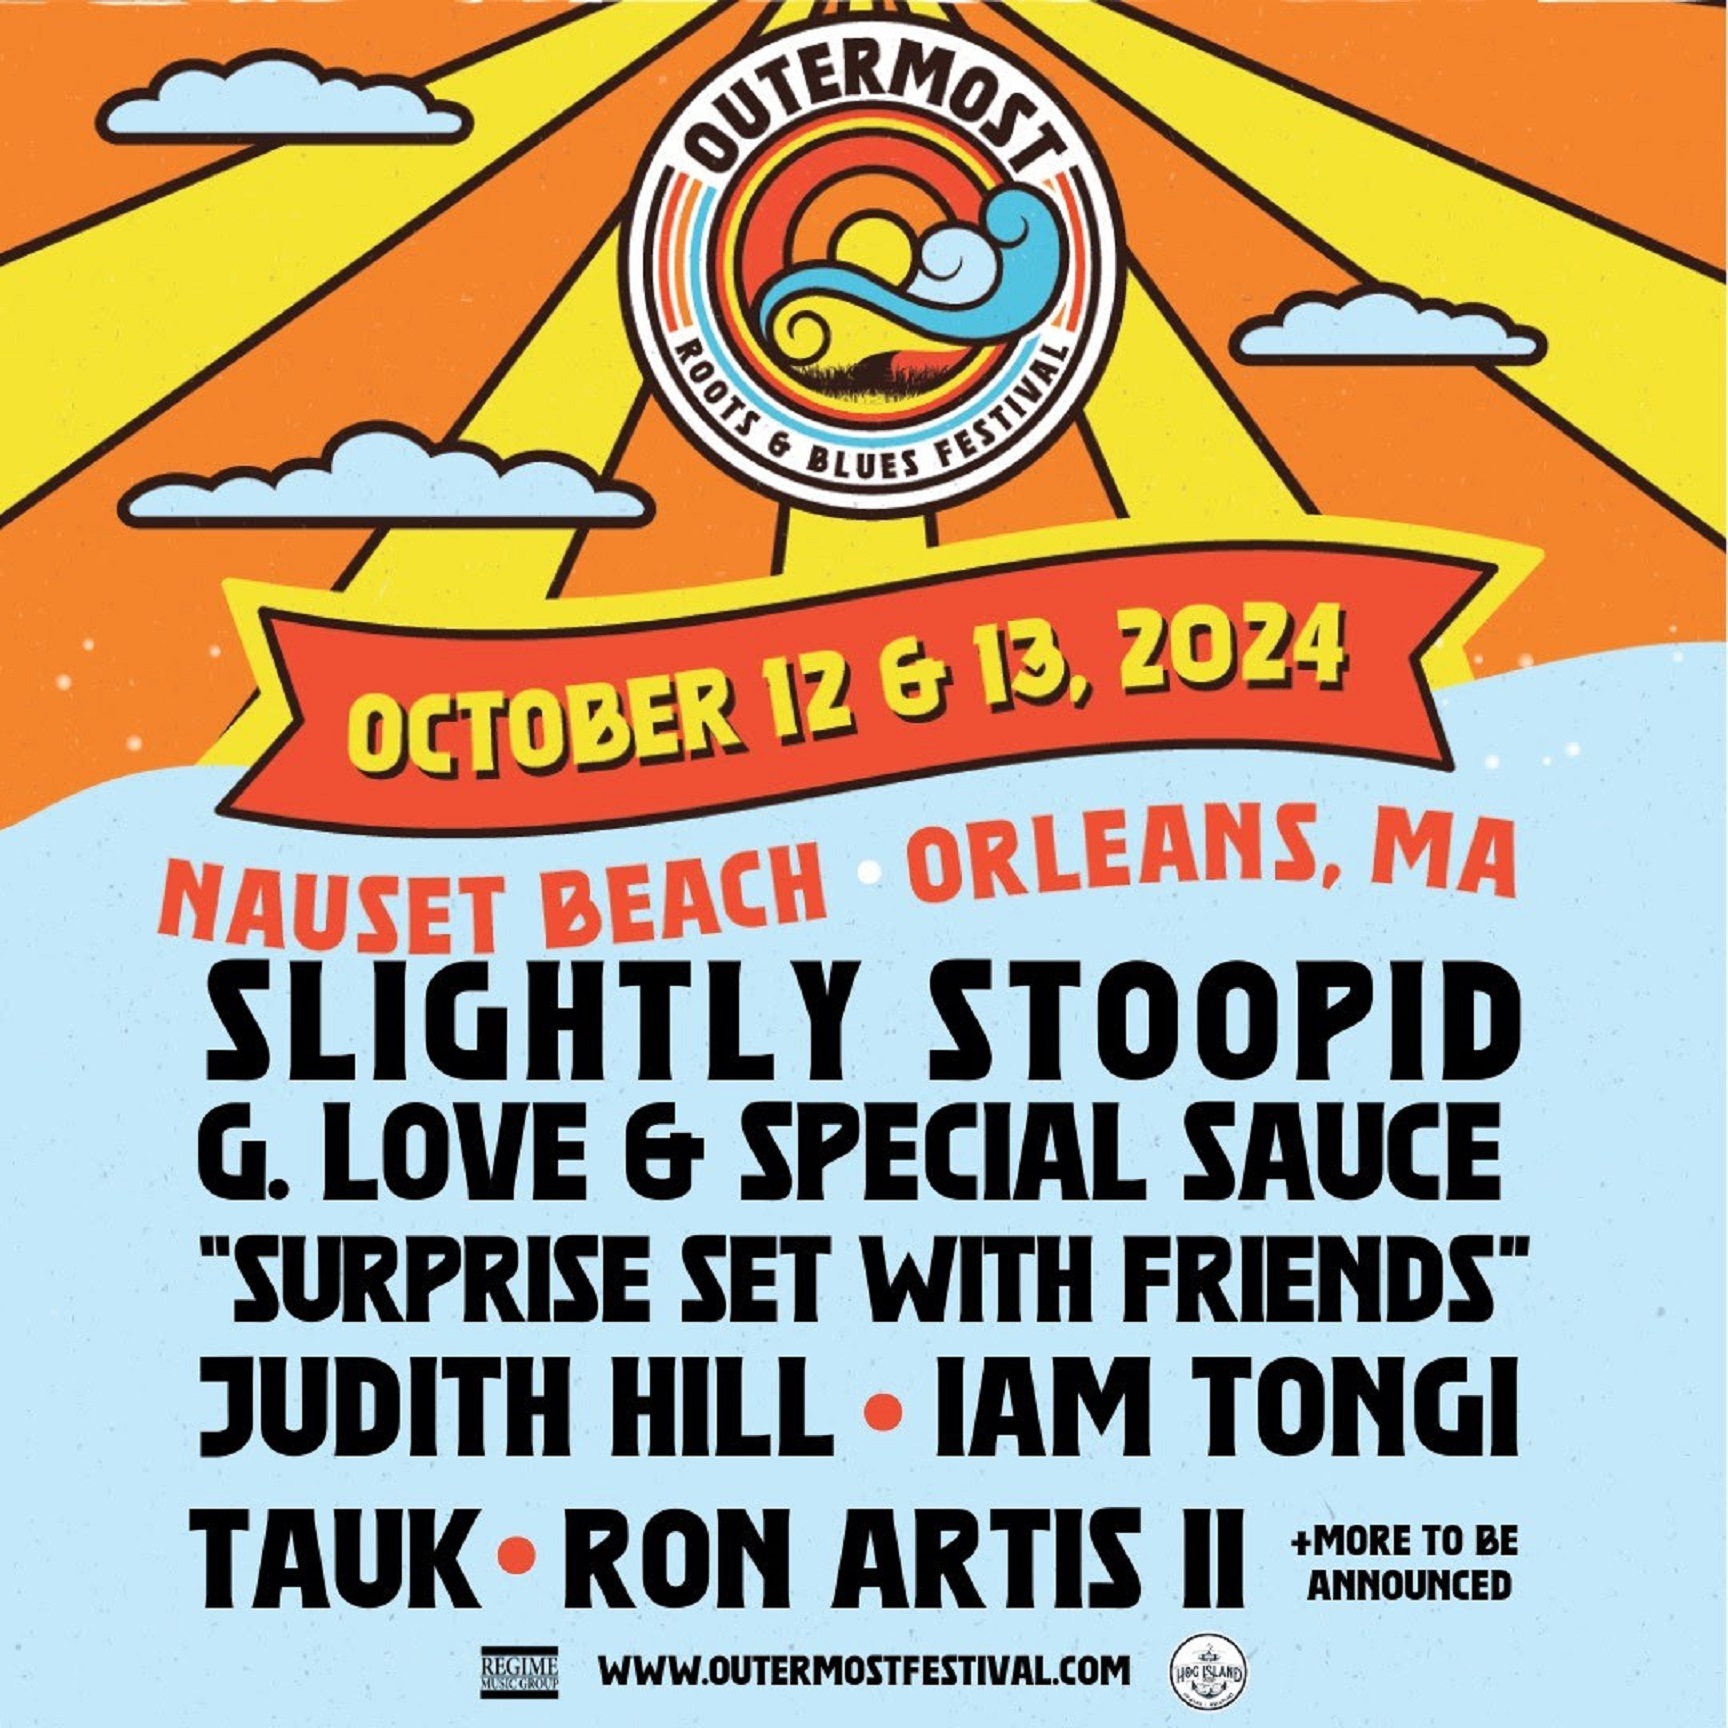 Outermost Roots & Blues Festival Returns to Orleans, Massachusetts With an Expanded 2-Day Festival October 12-13 at Nauset Beach